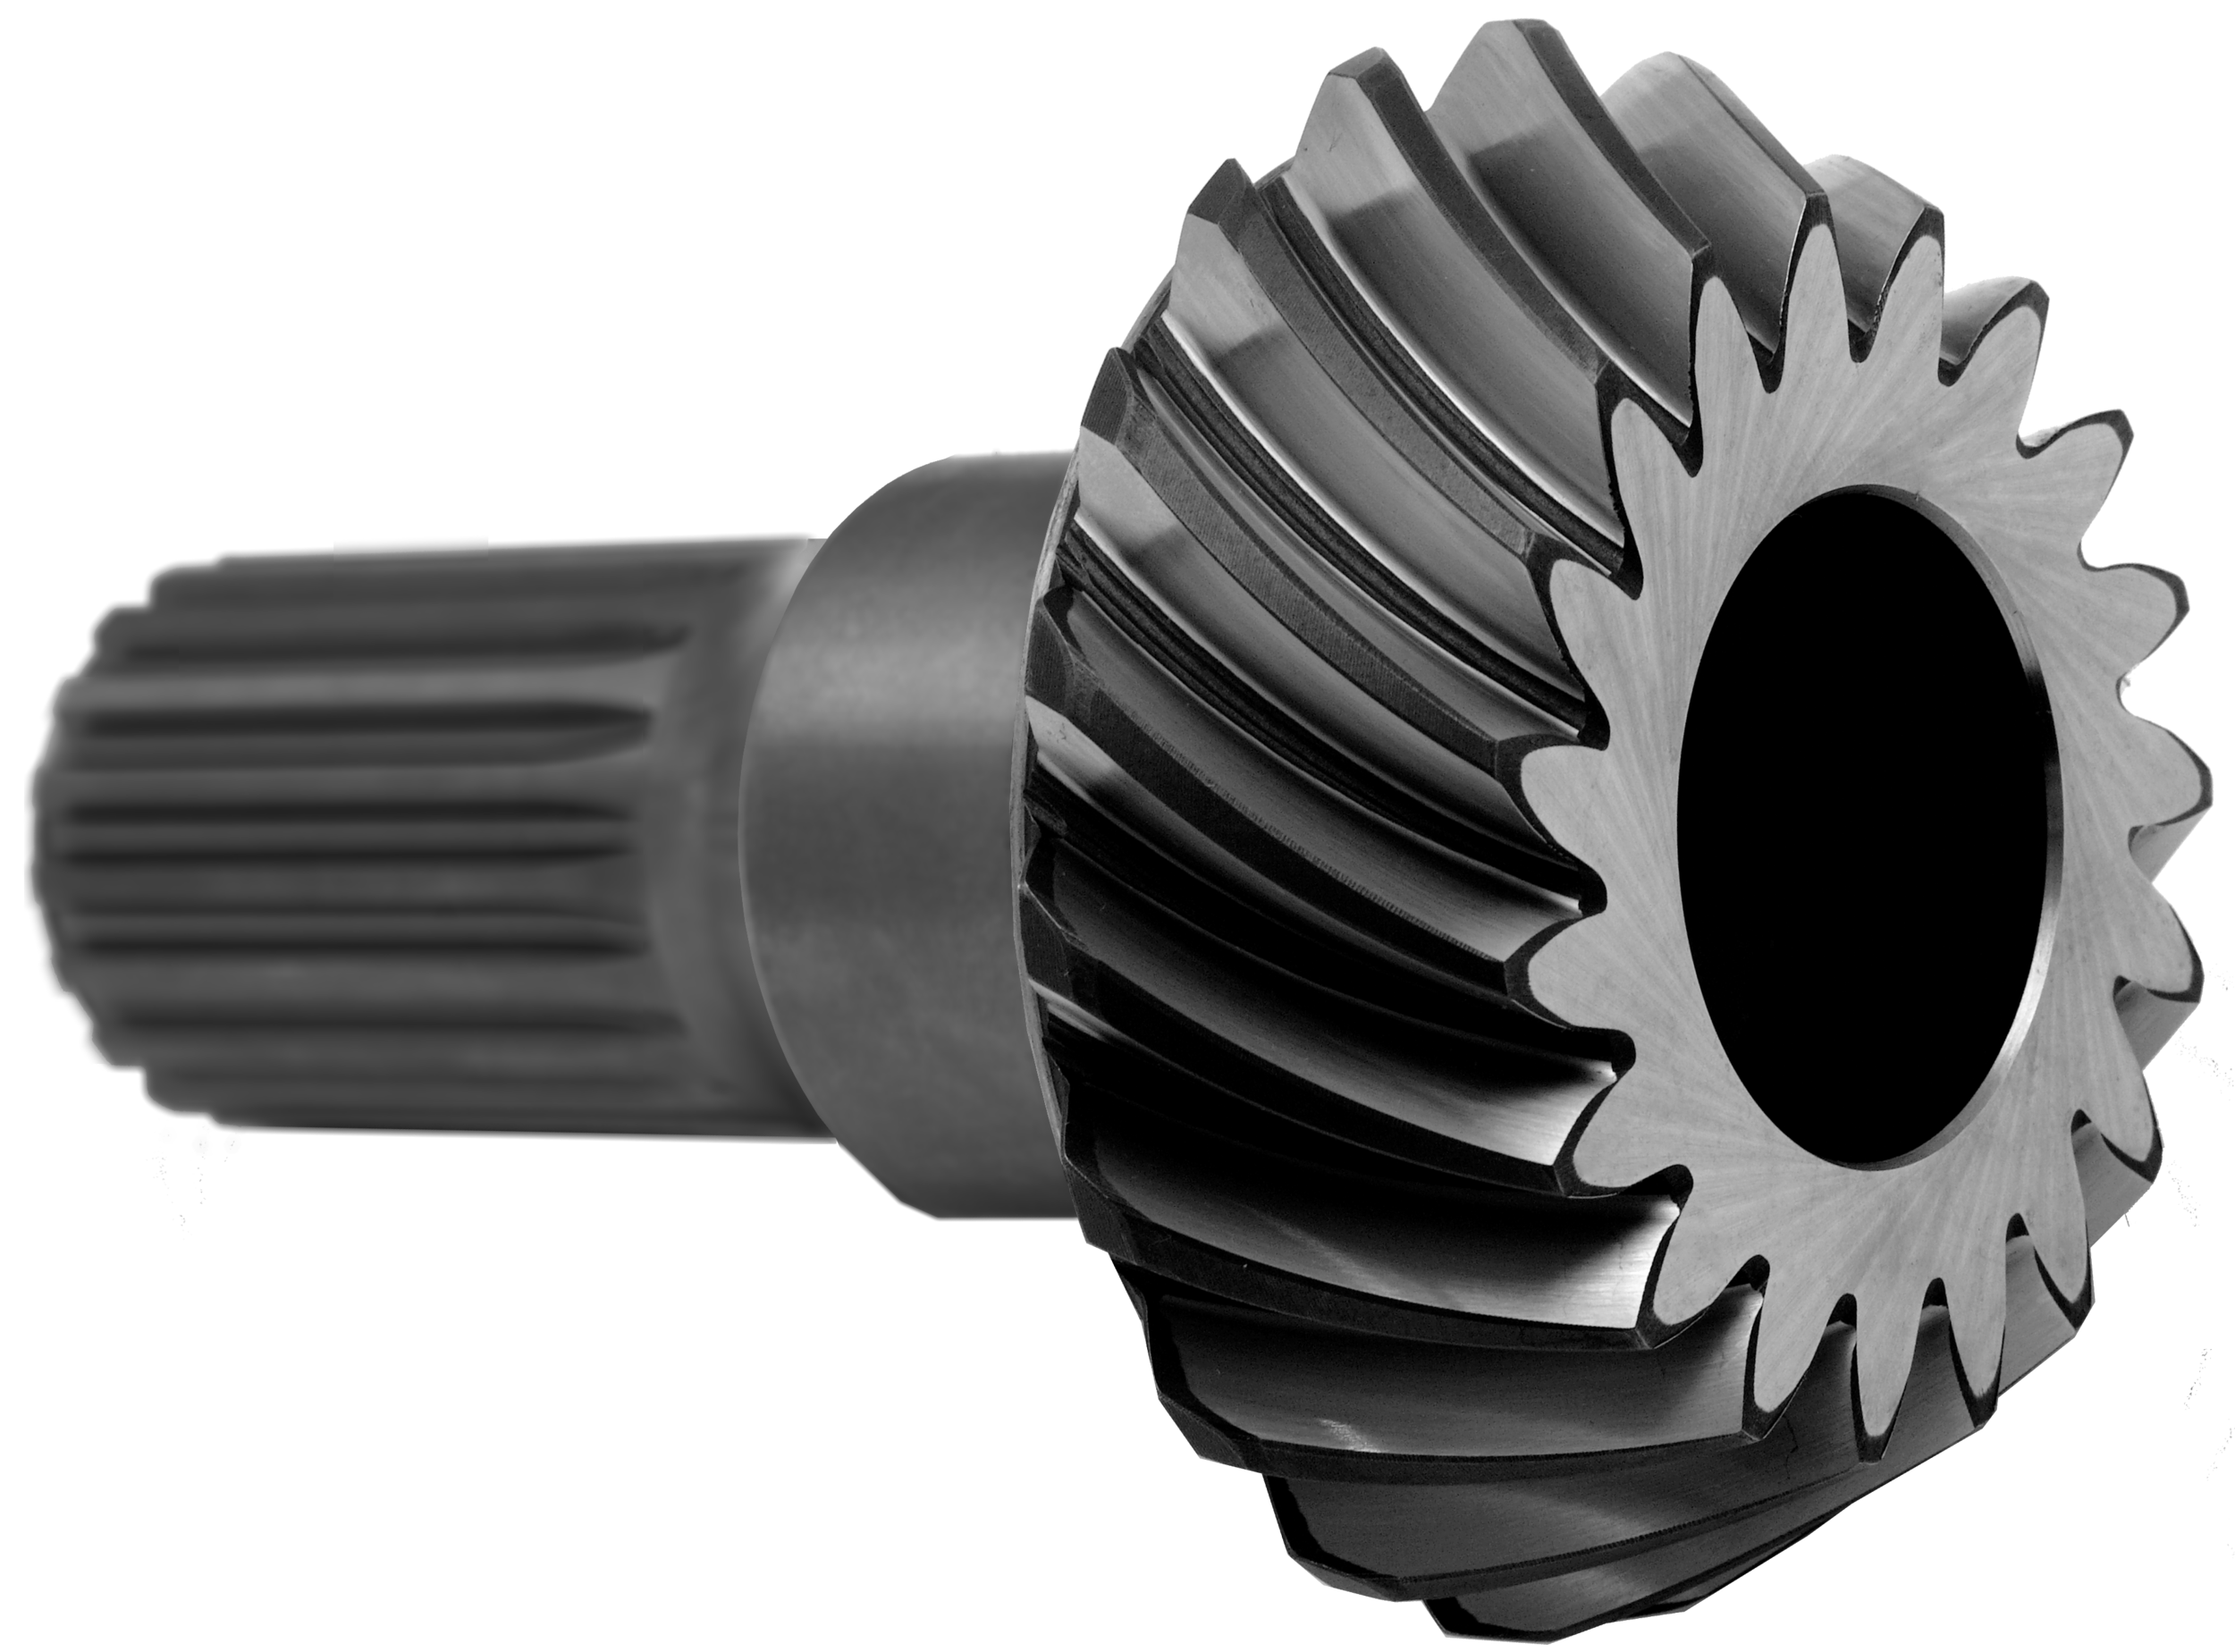 Gears and gearboxes made in Germany - TANDLER